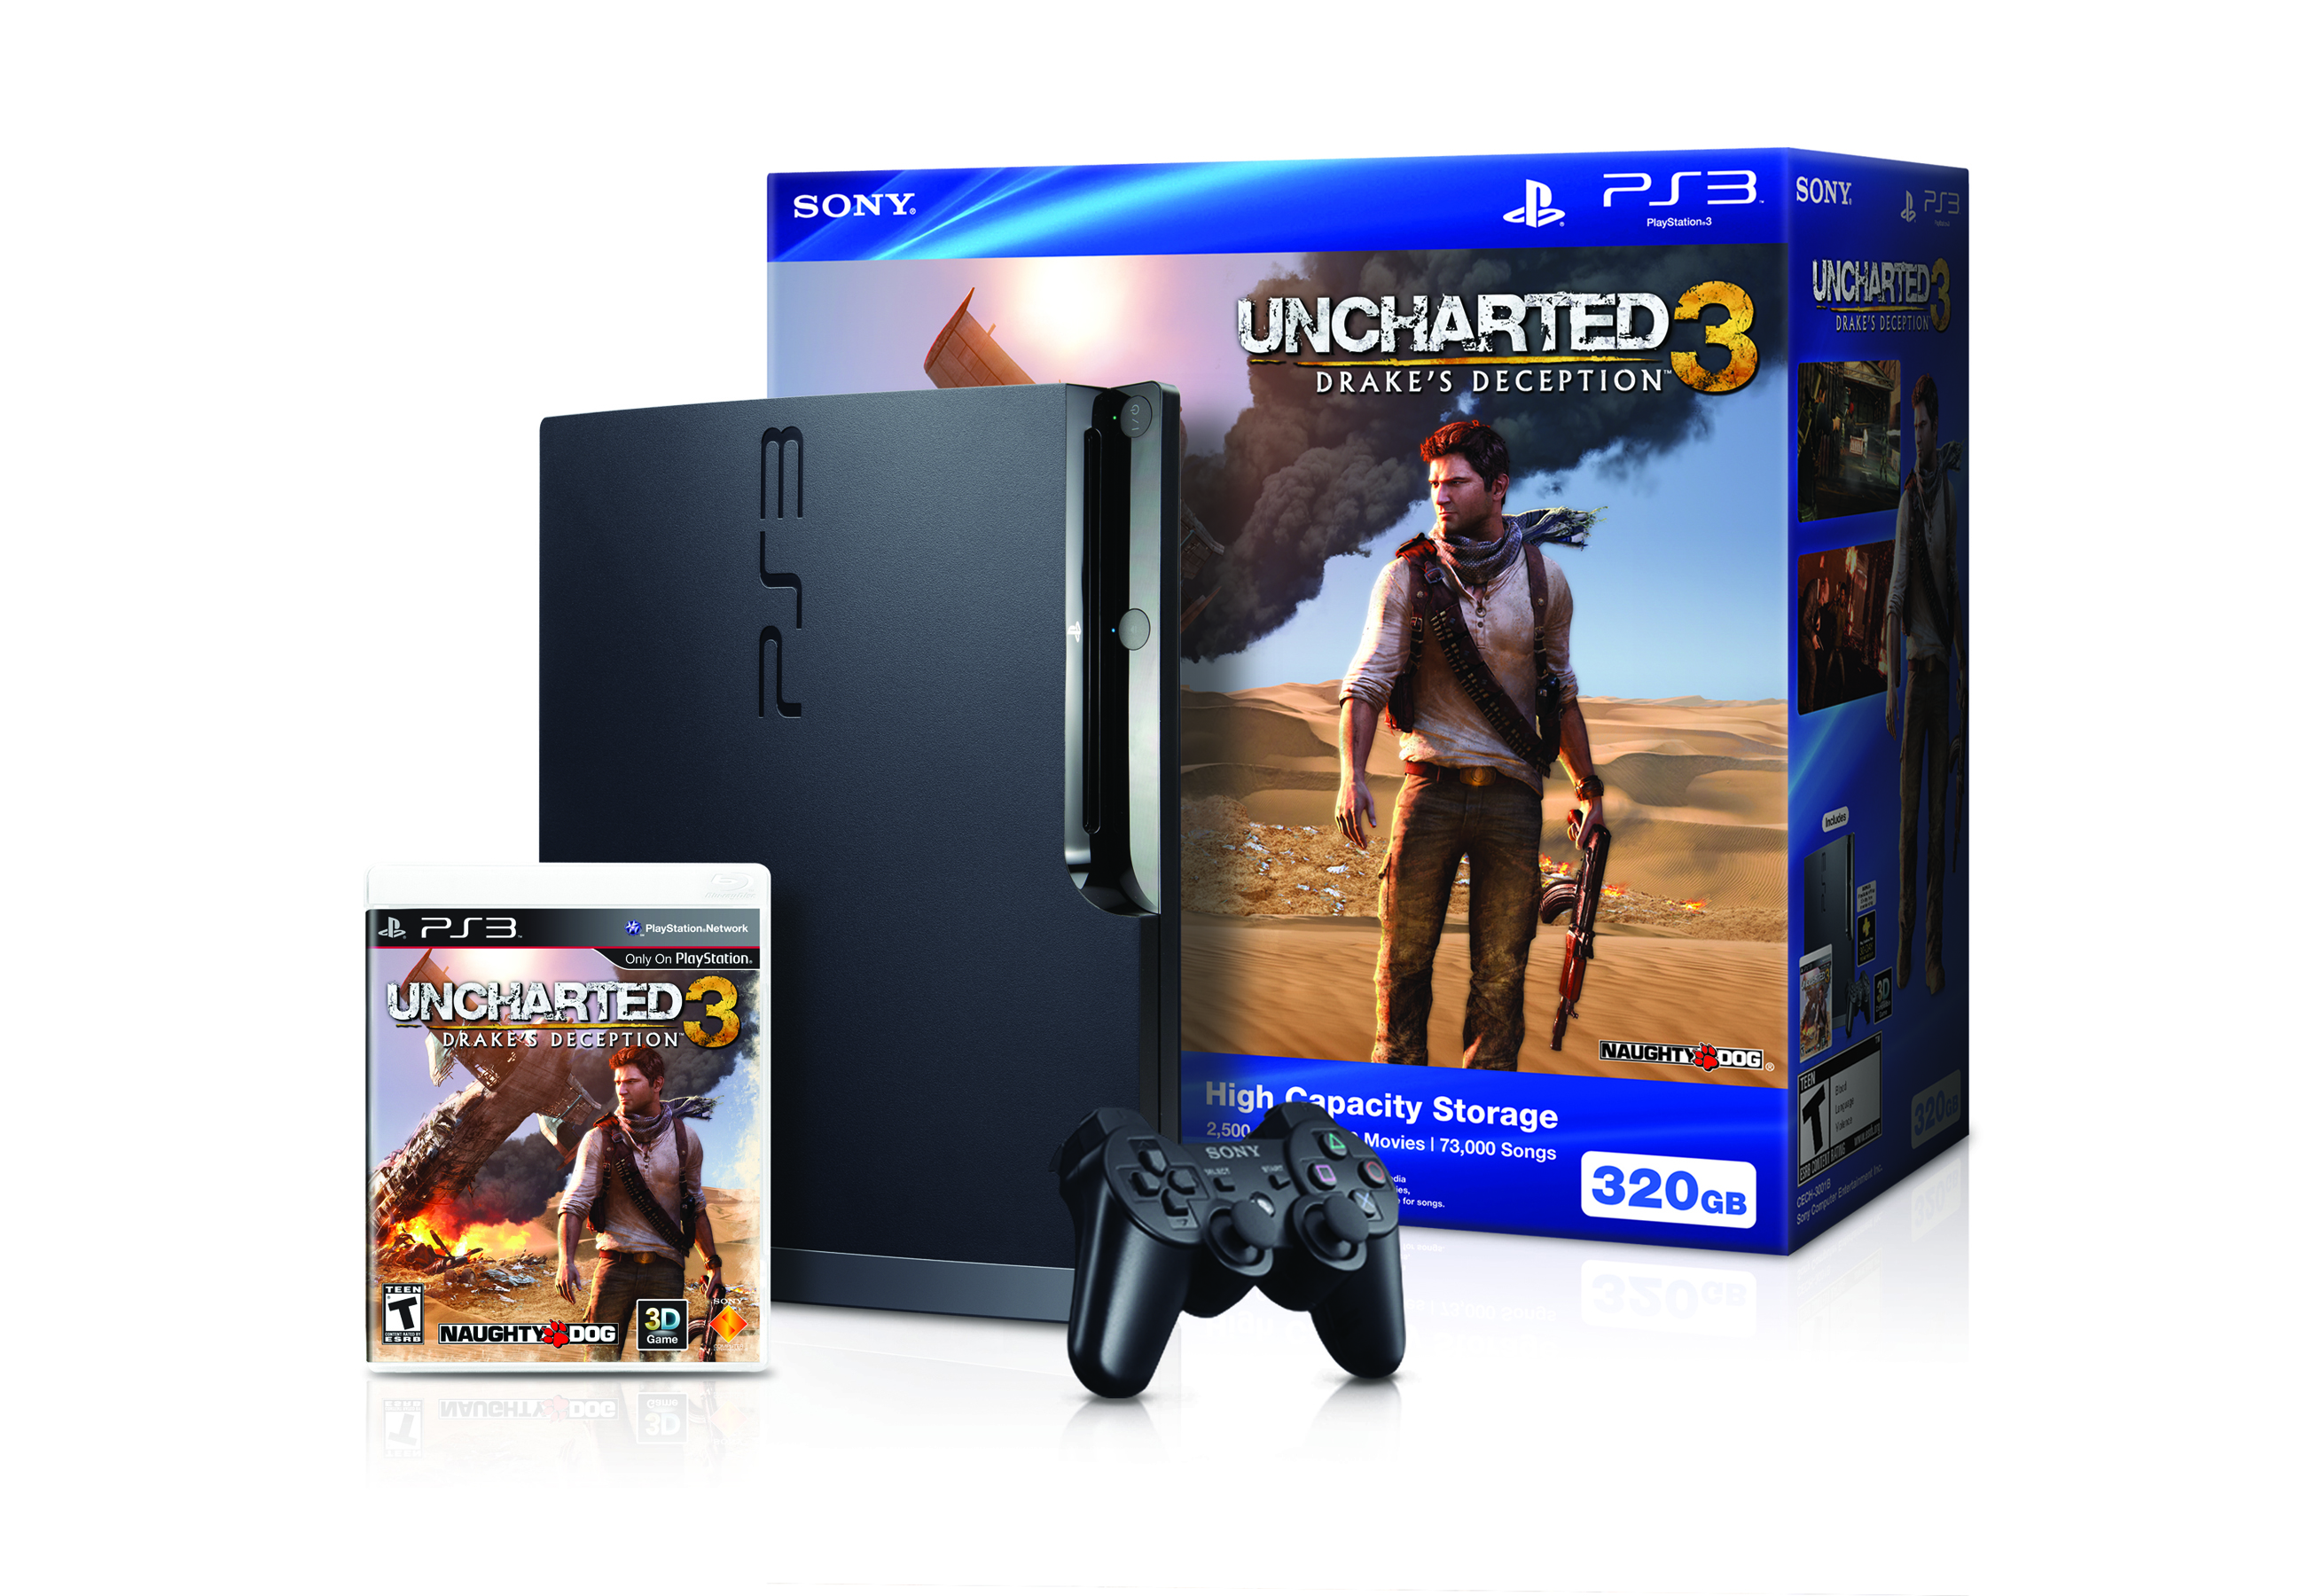 Ps3 versions. Игра Sony PLAYSTATION 3 Uncharted 3. Uncharted Sony PLAYSTATION. Анчартед 3 на пс3. Ps3 Uncharted 2 коробка.